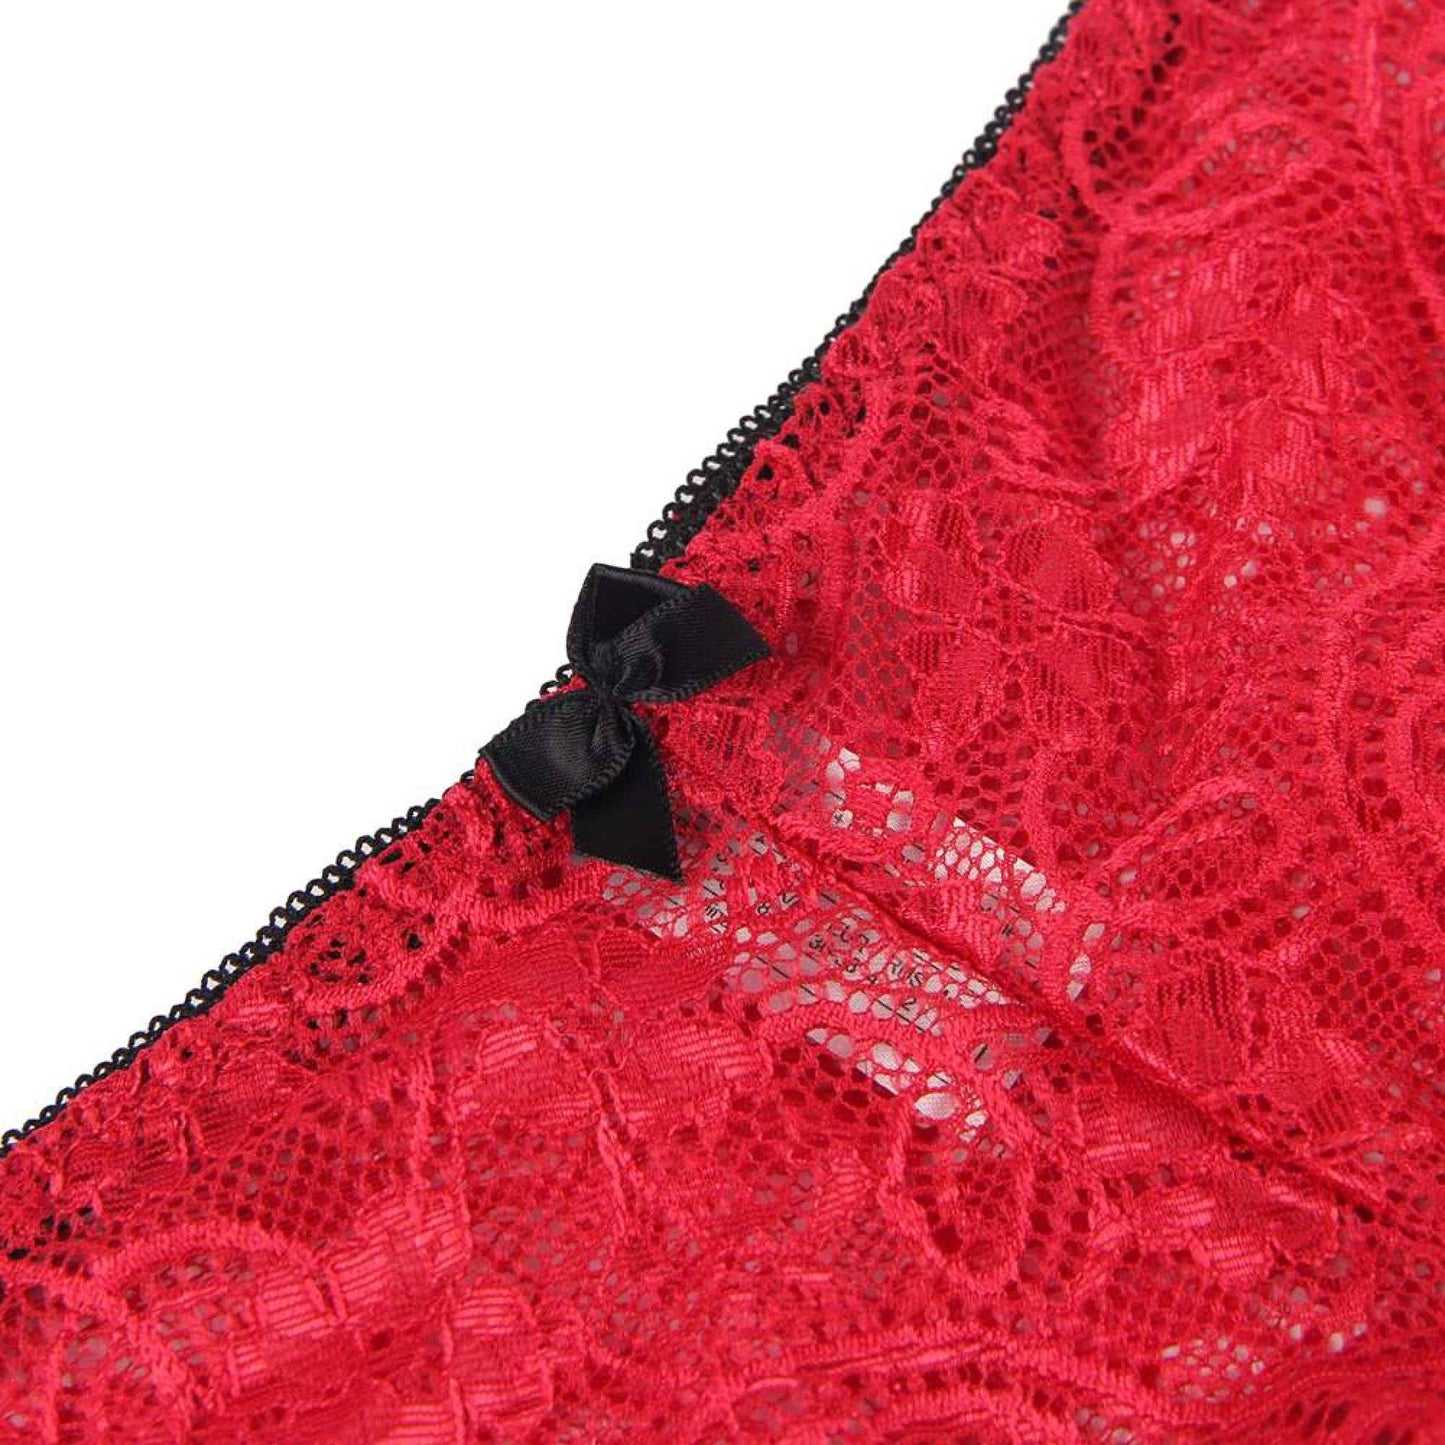 Red 3 Piece Lingerie Lace Set - Bra Panties Boxer Sexy Simulated Silk Underwear